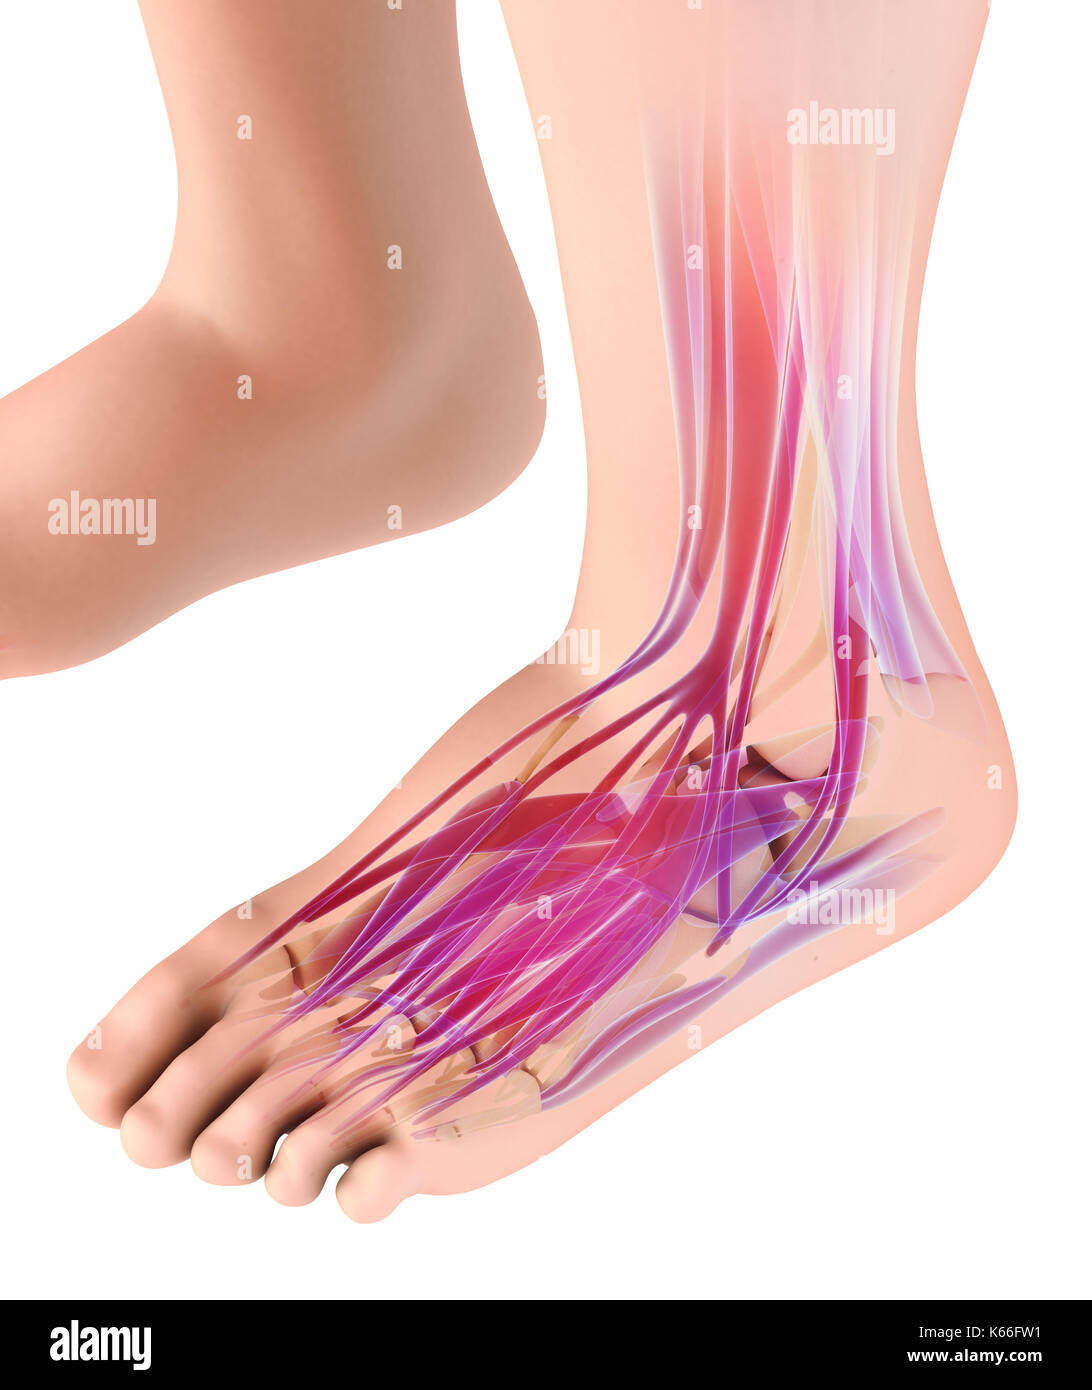 3d illustration of Medical and Scientific concept, Foot muscle - human muscular system. Stock Photo